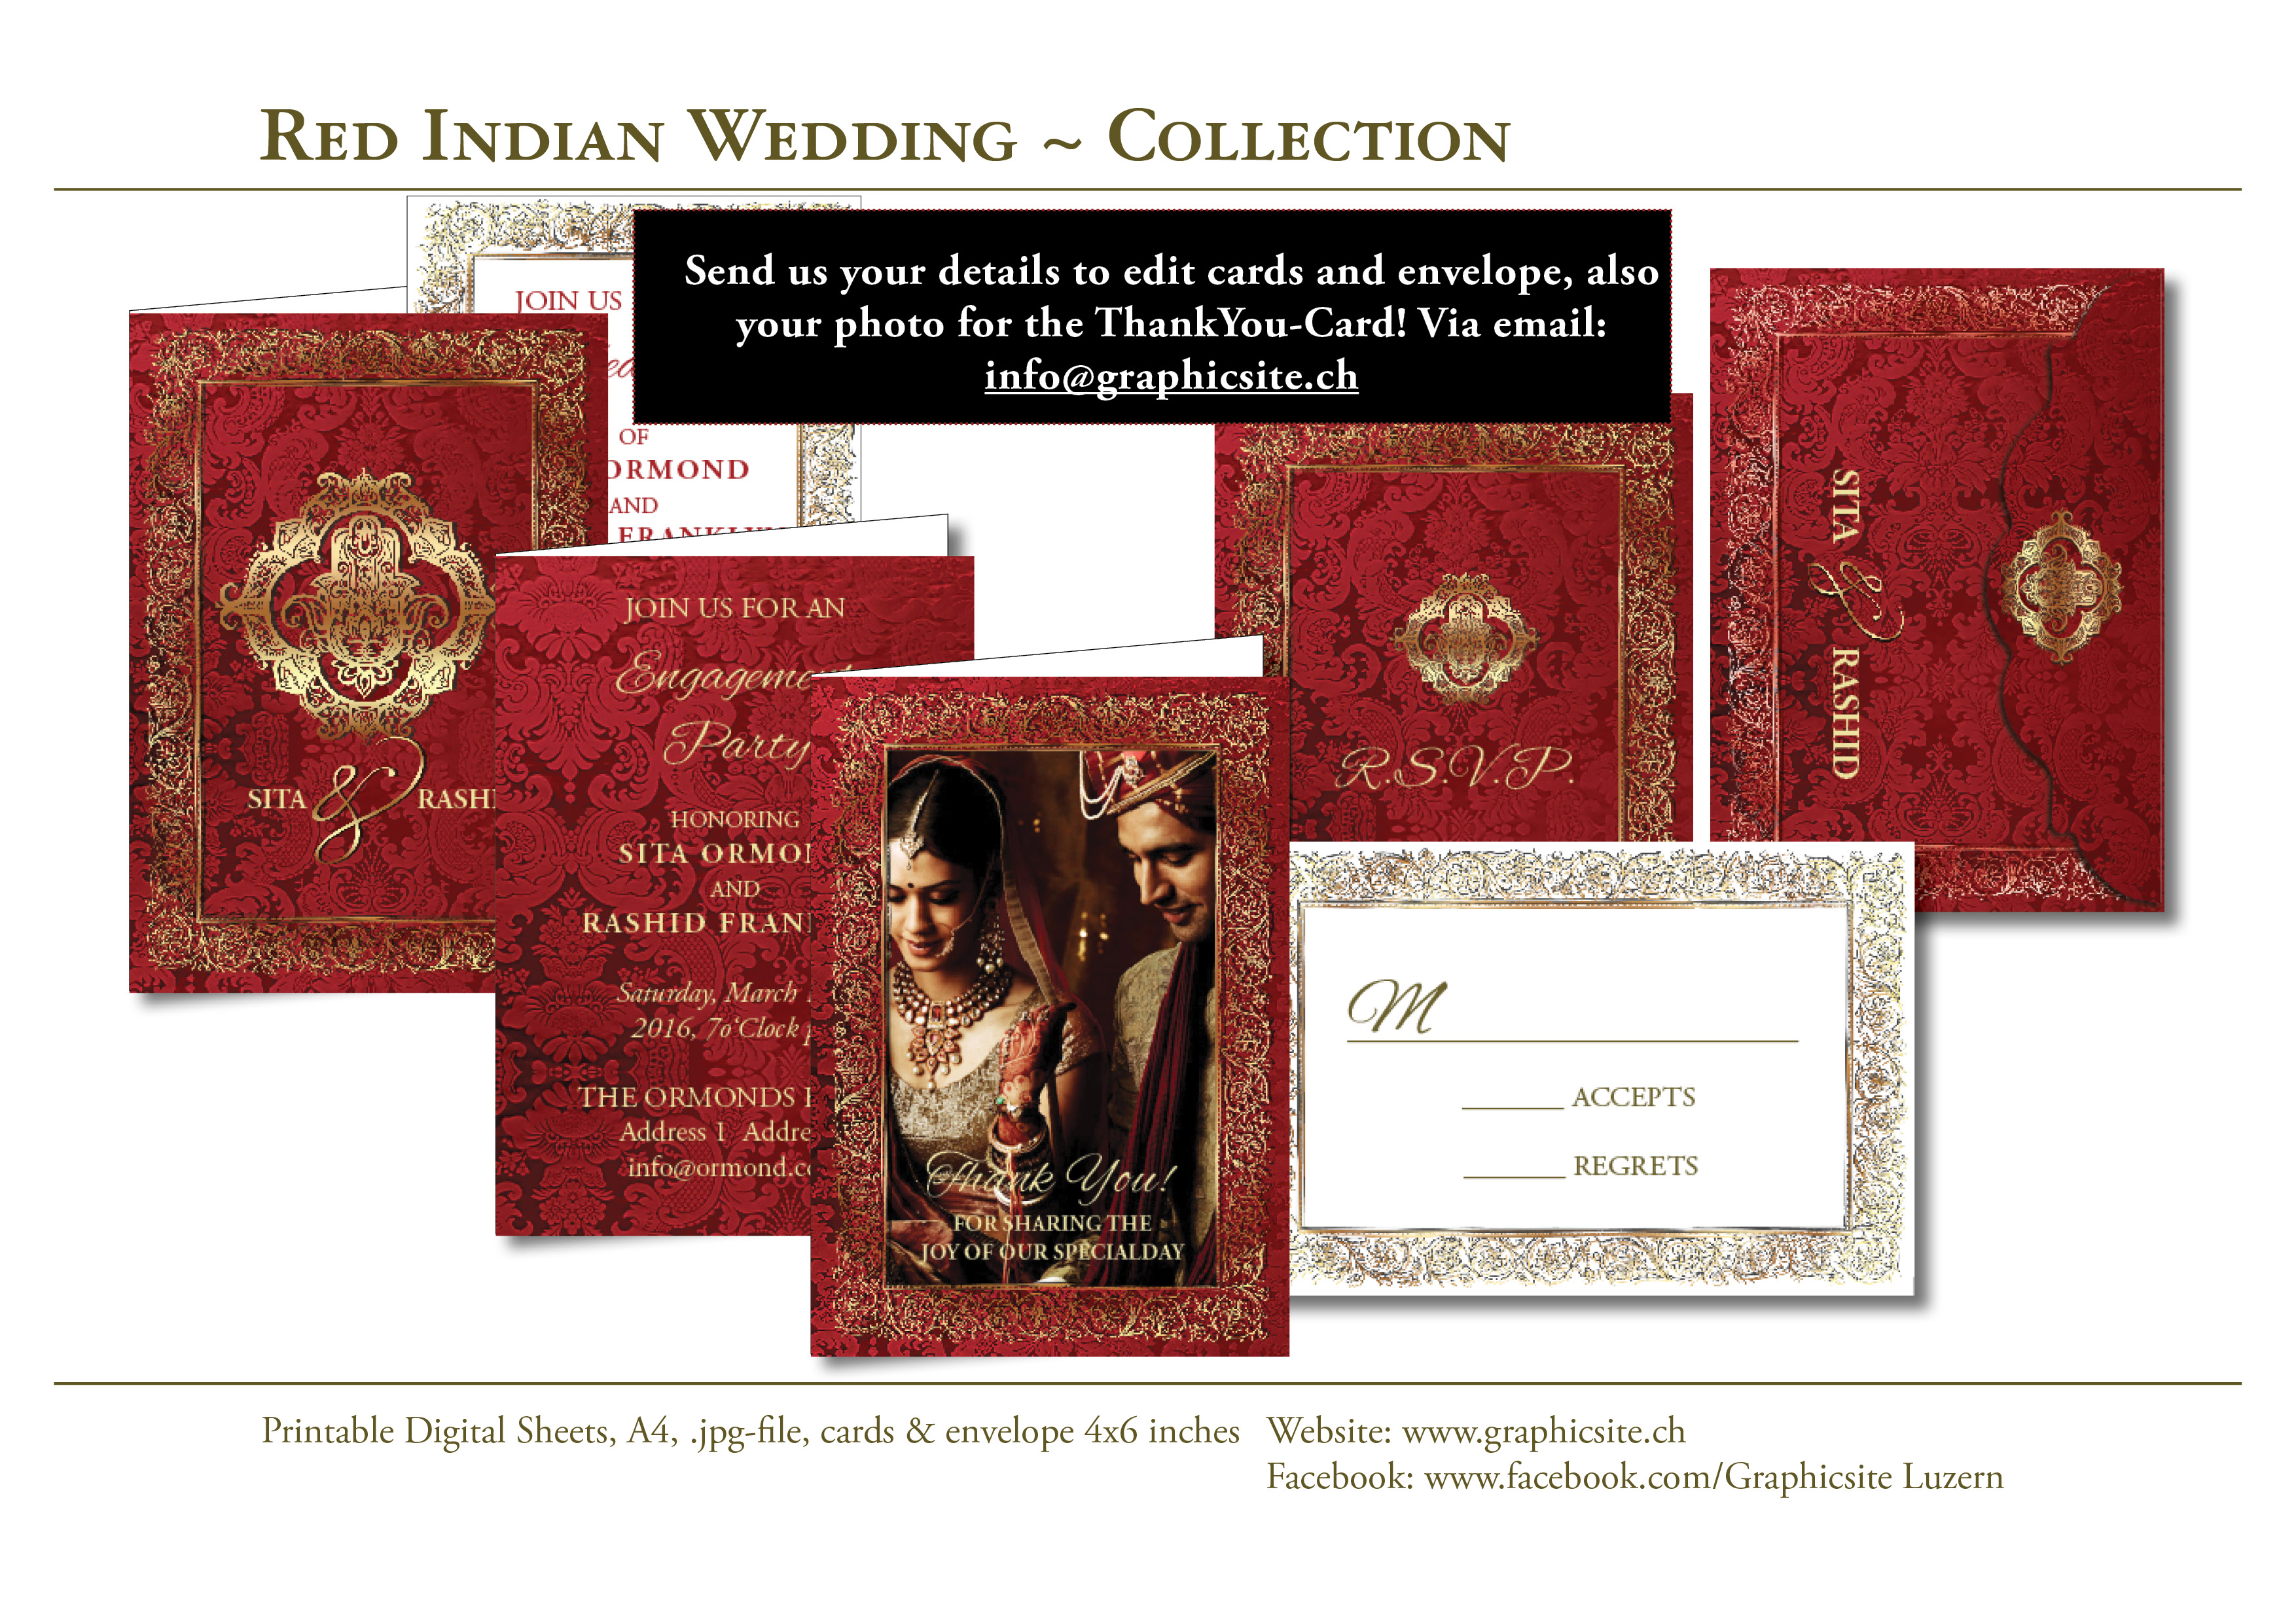 Red Indian Wedding - Invitation Collection - 6x4 inches #wedding, #invitation, #collection, #switzerland, #cardprinting,